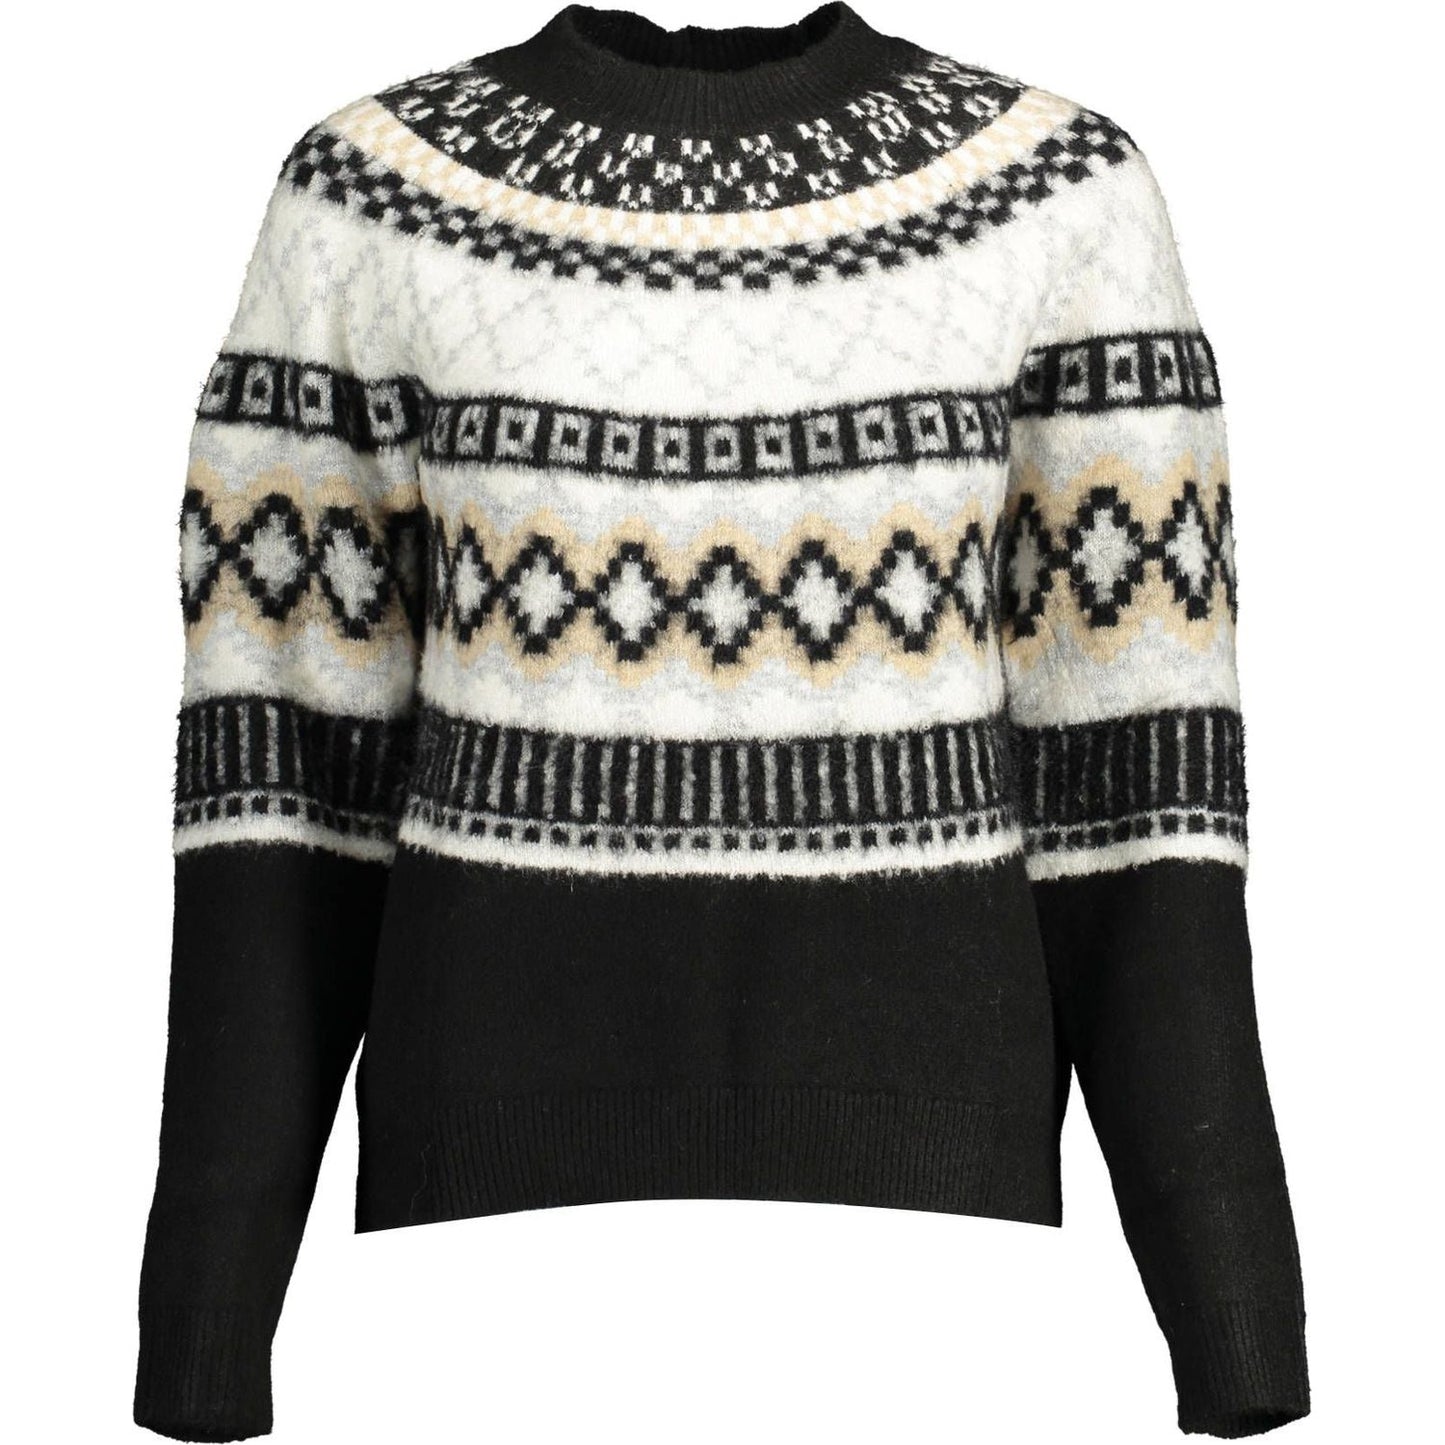 Desigual Chic Contrasting Detail Sweater chic-contrasting-detail-sweater